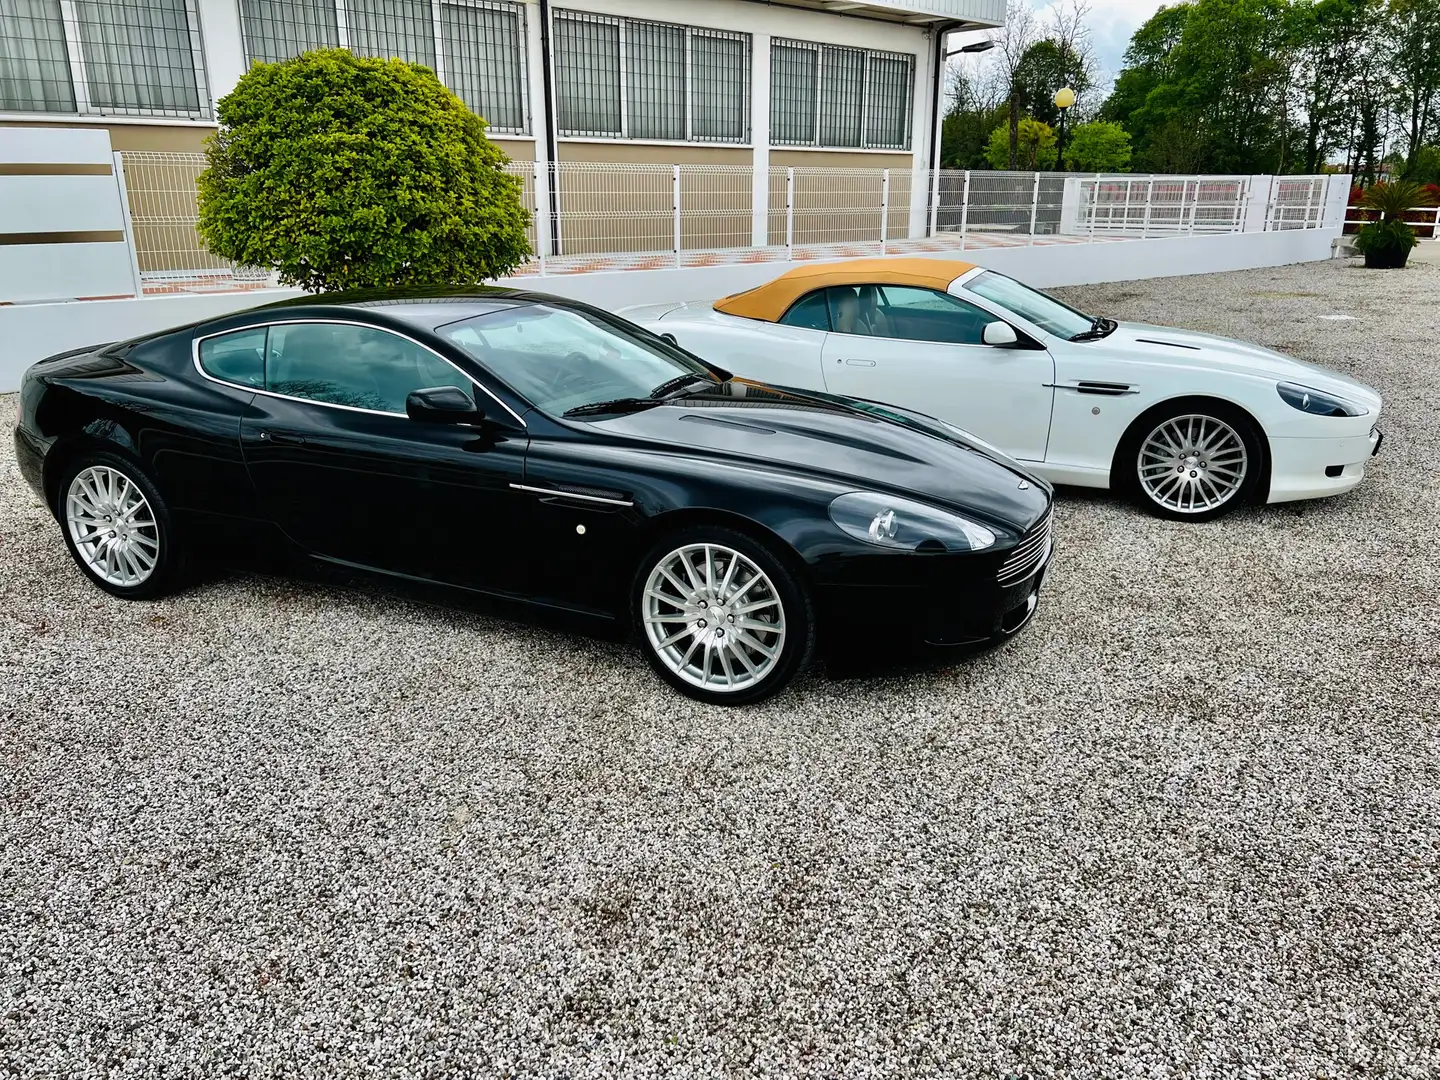 Aston Martin DB9 DB9 coupe 6.0 touchtronic 2 crna - 1